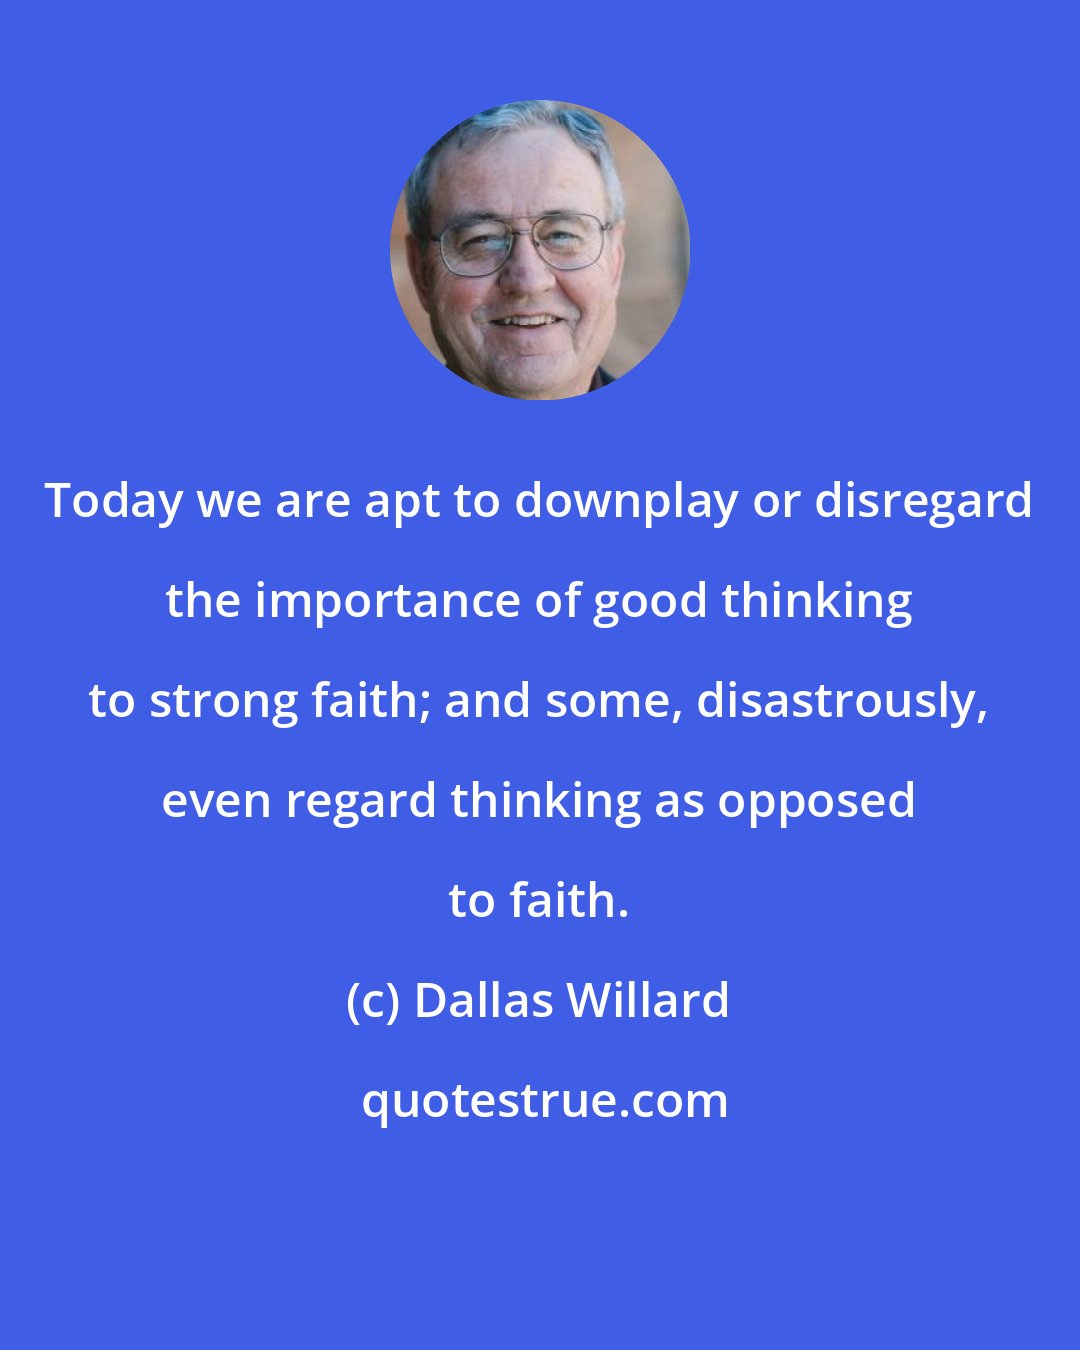 Dallas Willard: Today we are apt to downplay or disregard the importance of good thinking to strong faith; and some, disastrously, even regard thinking as opposed to faith.